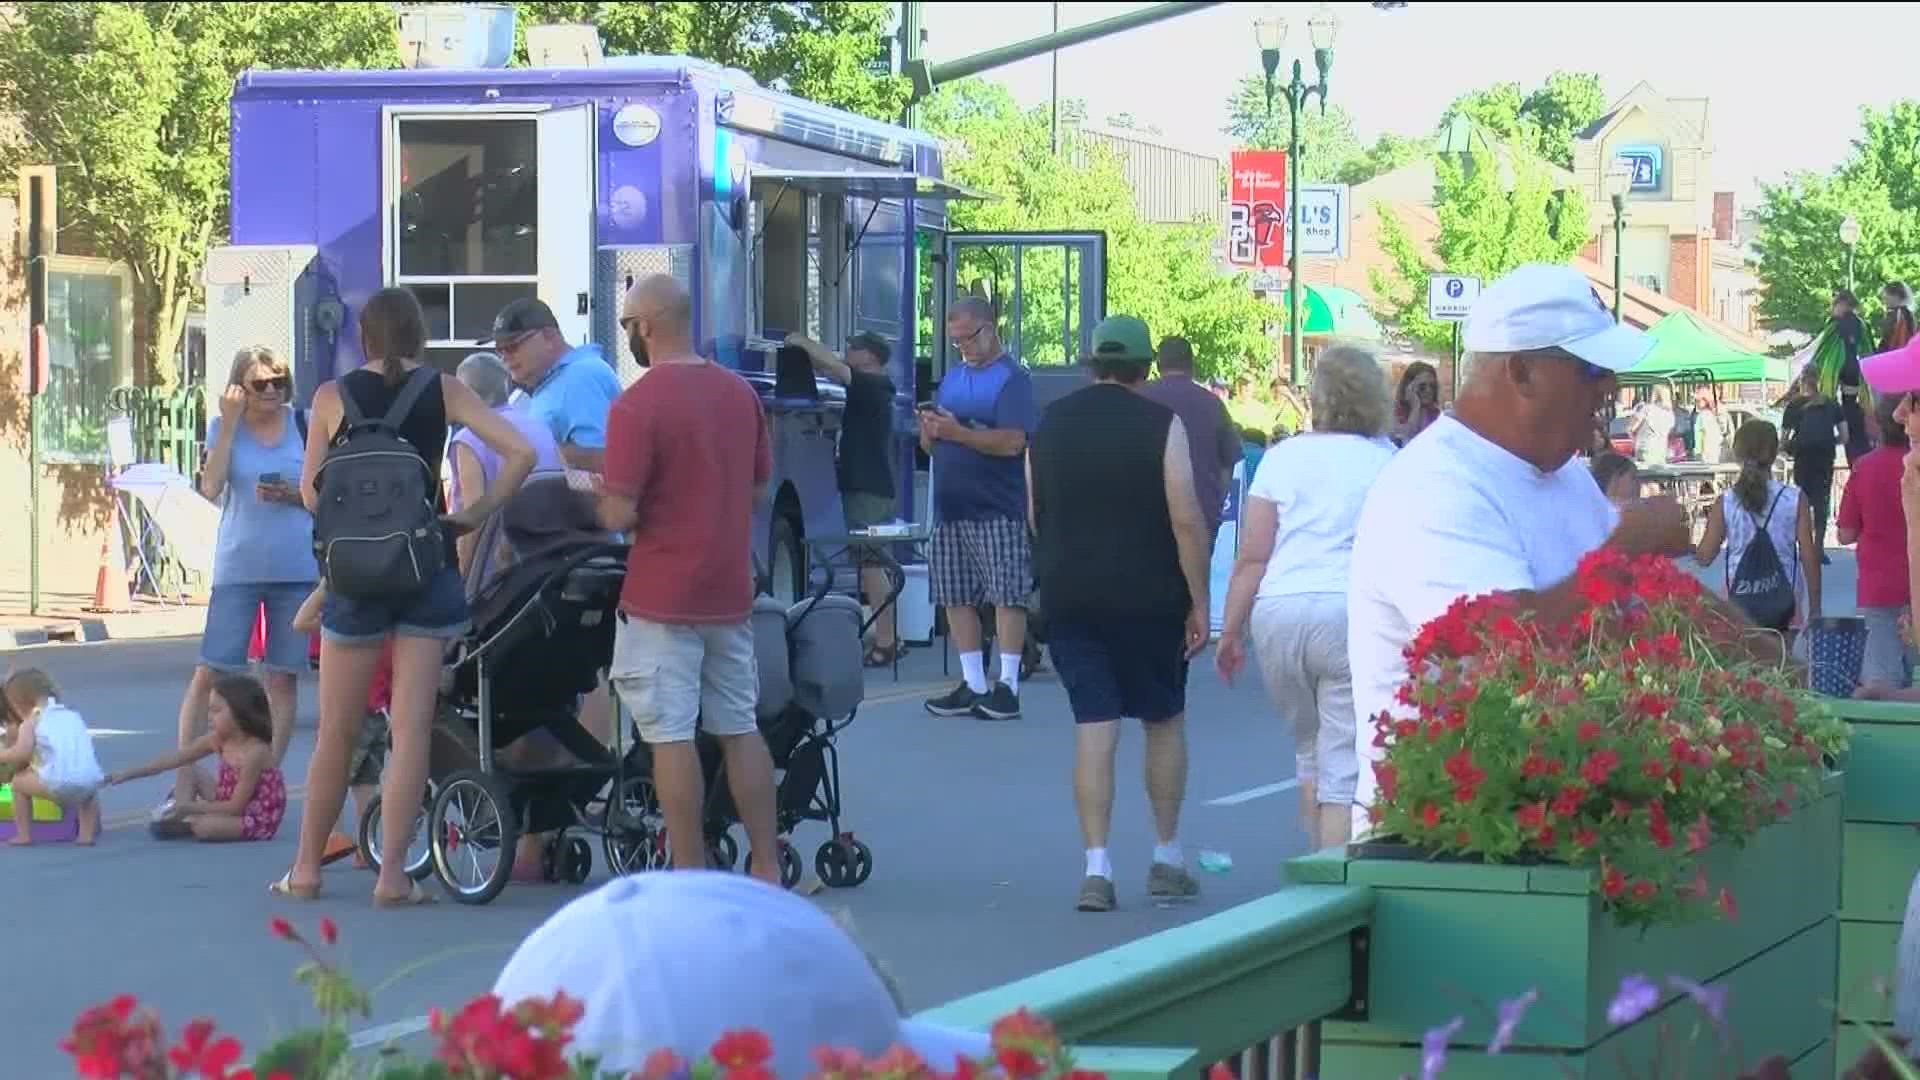 The festival is back on Main Street for the first time since 2019.